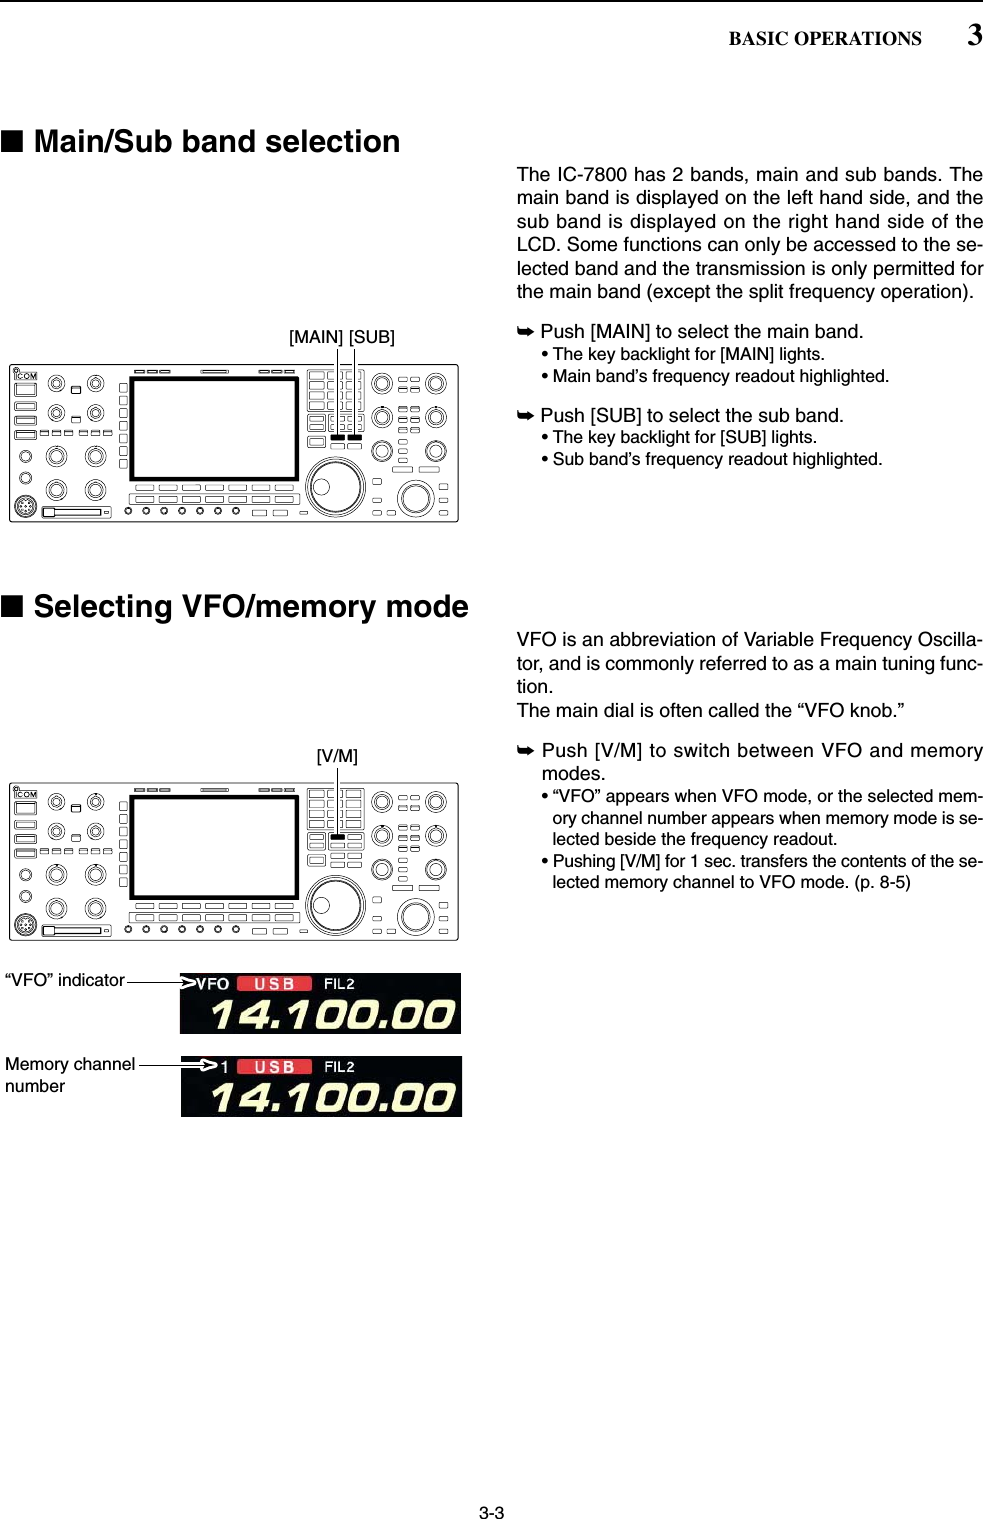 ■Main/Sub band selectionThe IC-7800 has 2 bands, main and sub bands. Themain band is displayed on the left hand side, and thesub band is displayed on the right hand side of theLCD. Some functions can only be accessed to the se-lected band and the transmission is only permitted forthe main band (except the split frequency operation). ➥Push [MAIN] to select the main band.• The key backlight for [MAIN] lights.• Main band’s frequency readout highlighted.➥Push [SUB] to select the sub band.• The key backlight for [SUB] lights.• Sub band’s frequency readout highlighted.■Selecting VFO/memory modeVFO is an abbreviation of Variable Frequency Oscilla-tor, and is commonly referred to as a main tuning func-tion.The main dial is often called the “VFO knob.”➥Push [V/M] to switch between VFO and memorymodes.• “VFO” appears when VFO mode, or the selected mem-ory channel number appears when memory mode is se-lected beside the frequency readout.• Pushing [V/M] for 1 sec. transfers the contents of the se-lected memory channel to VFO mode. (p. 8-5)“VFO” indicatorMemory channelnumber[V/M][MAIN] [SUB]3-33BASIC OPERATIONS